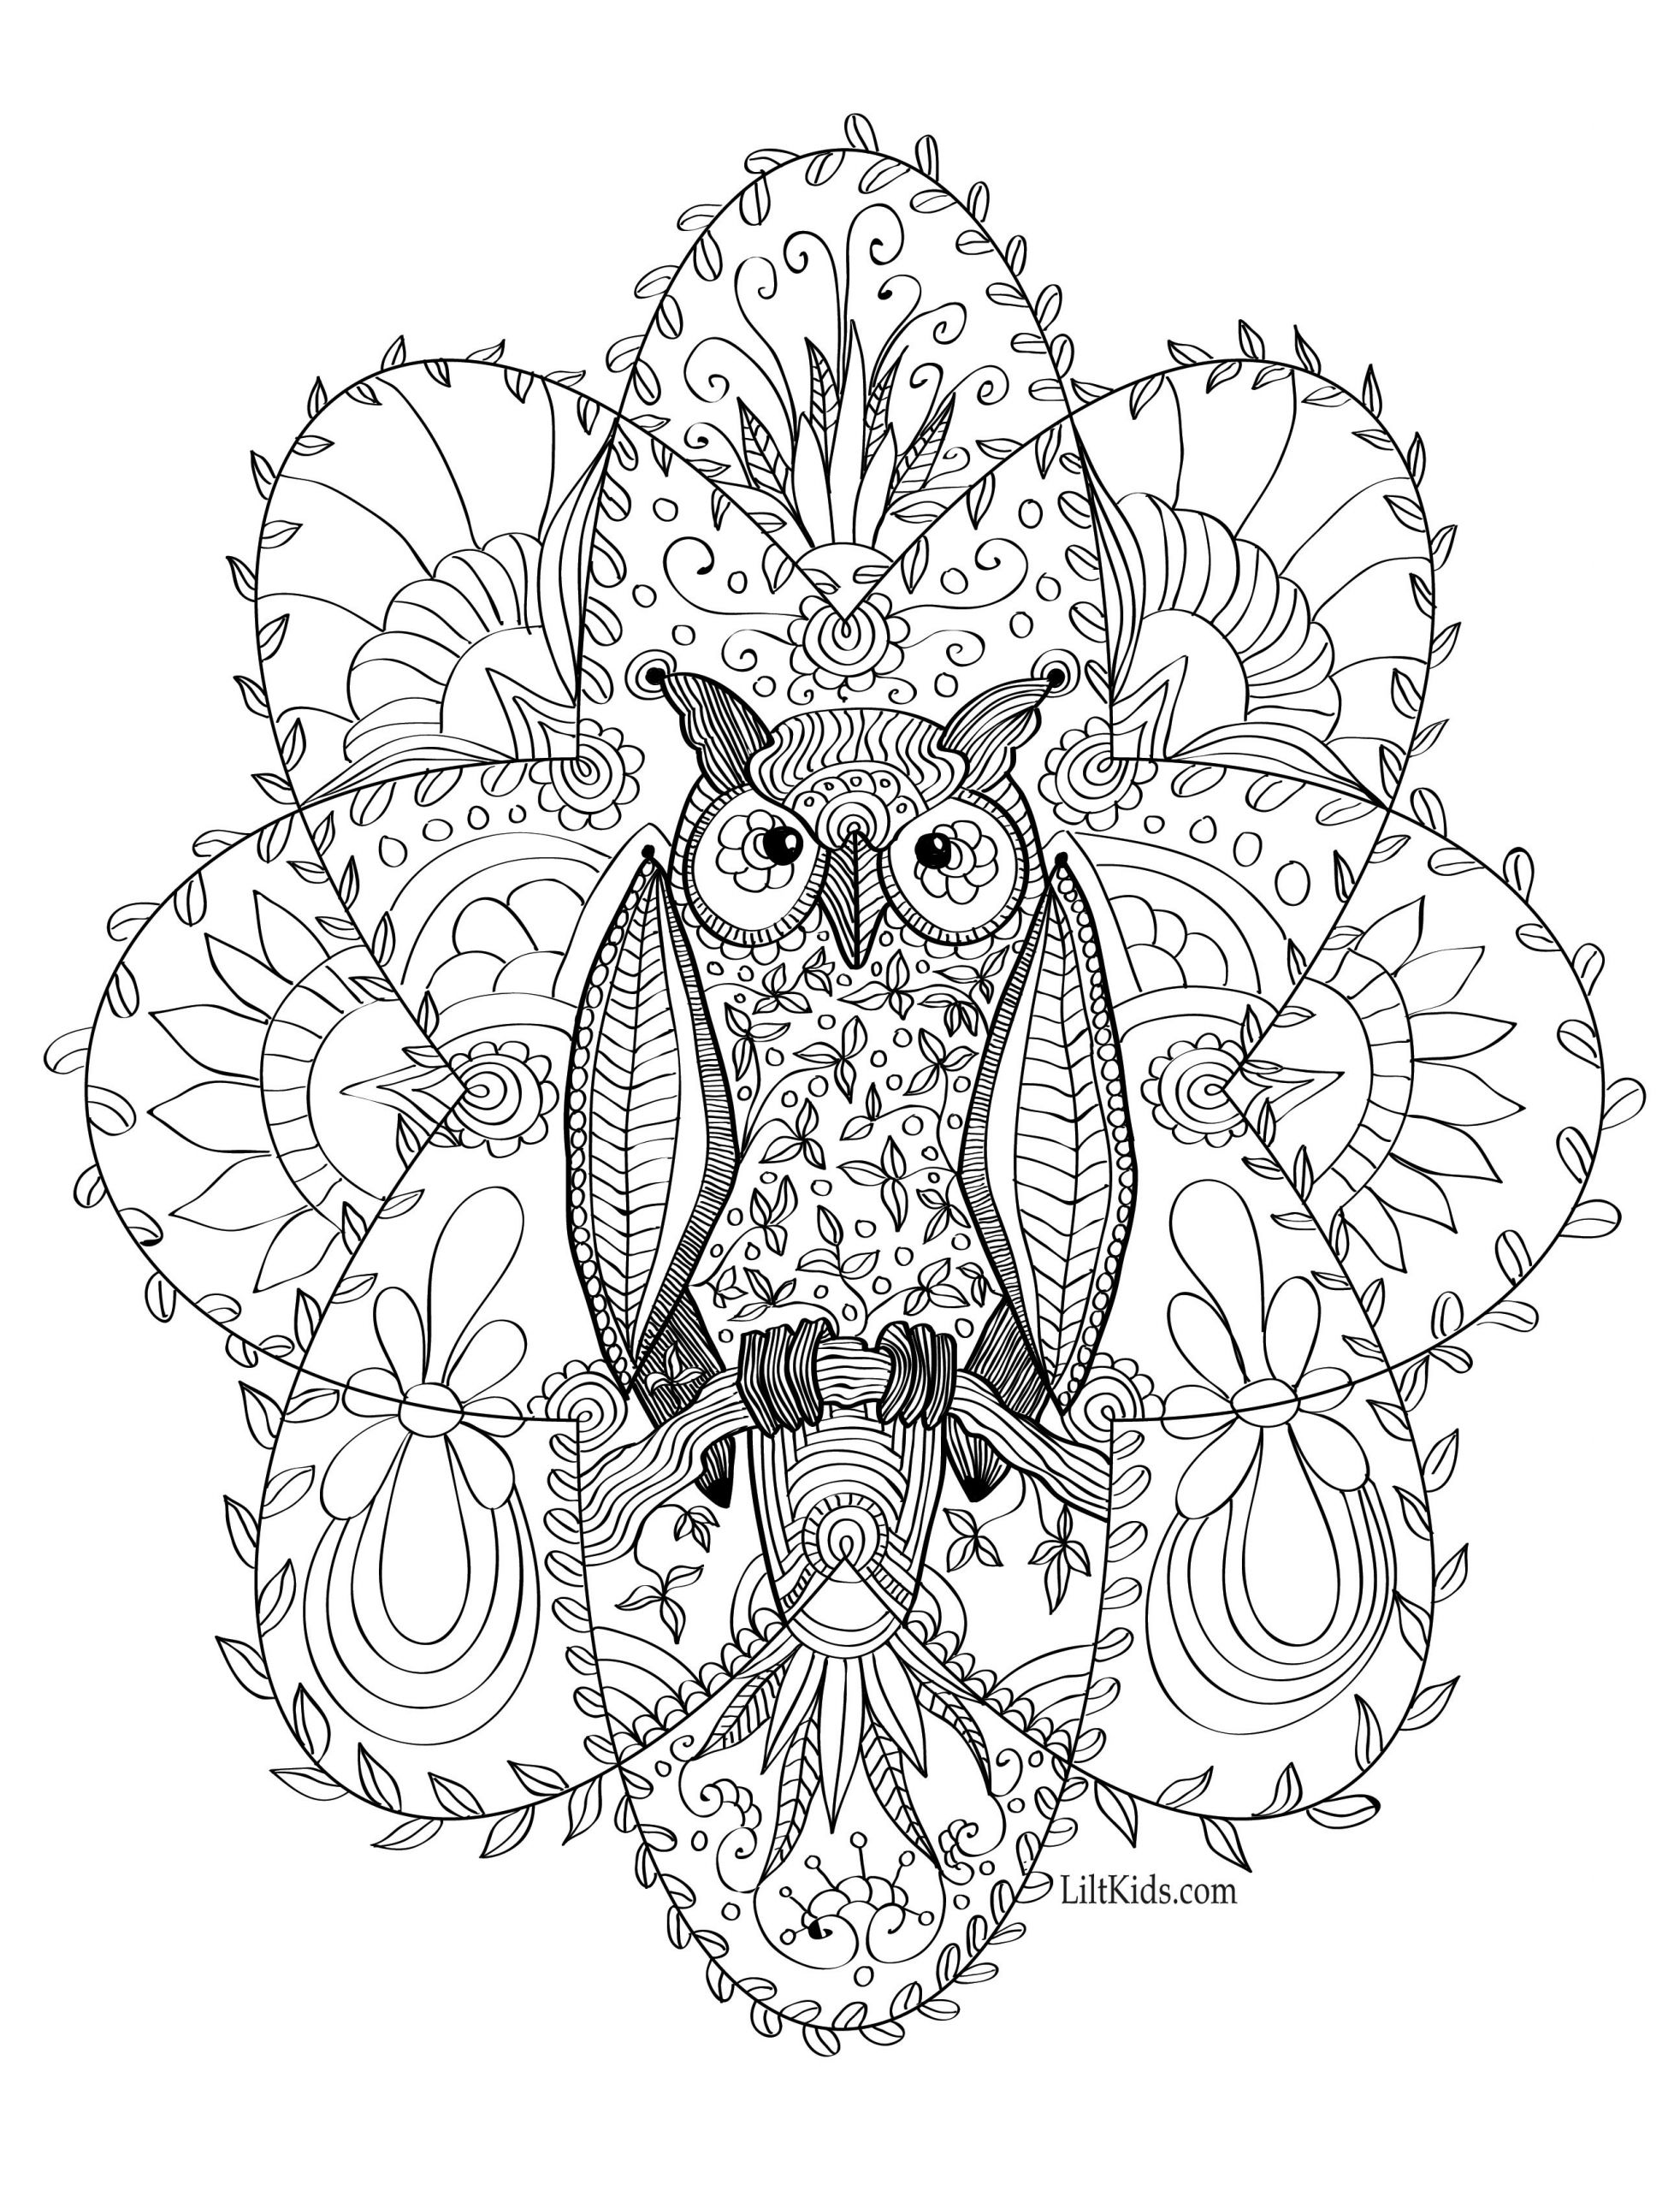 Lilt Kids Coloring Books
 Lilt Kids Coloring Books – Free Adult Coloring Book Pages